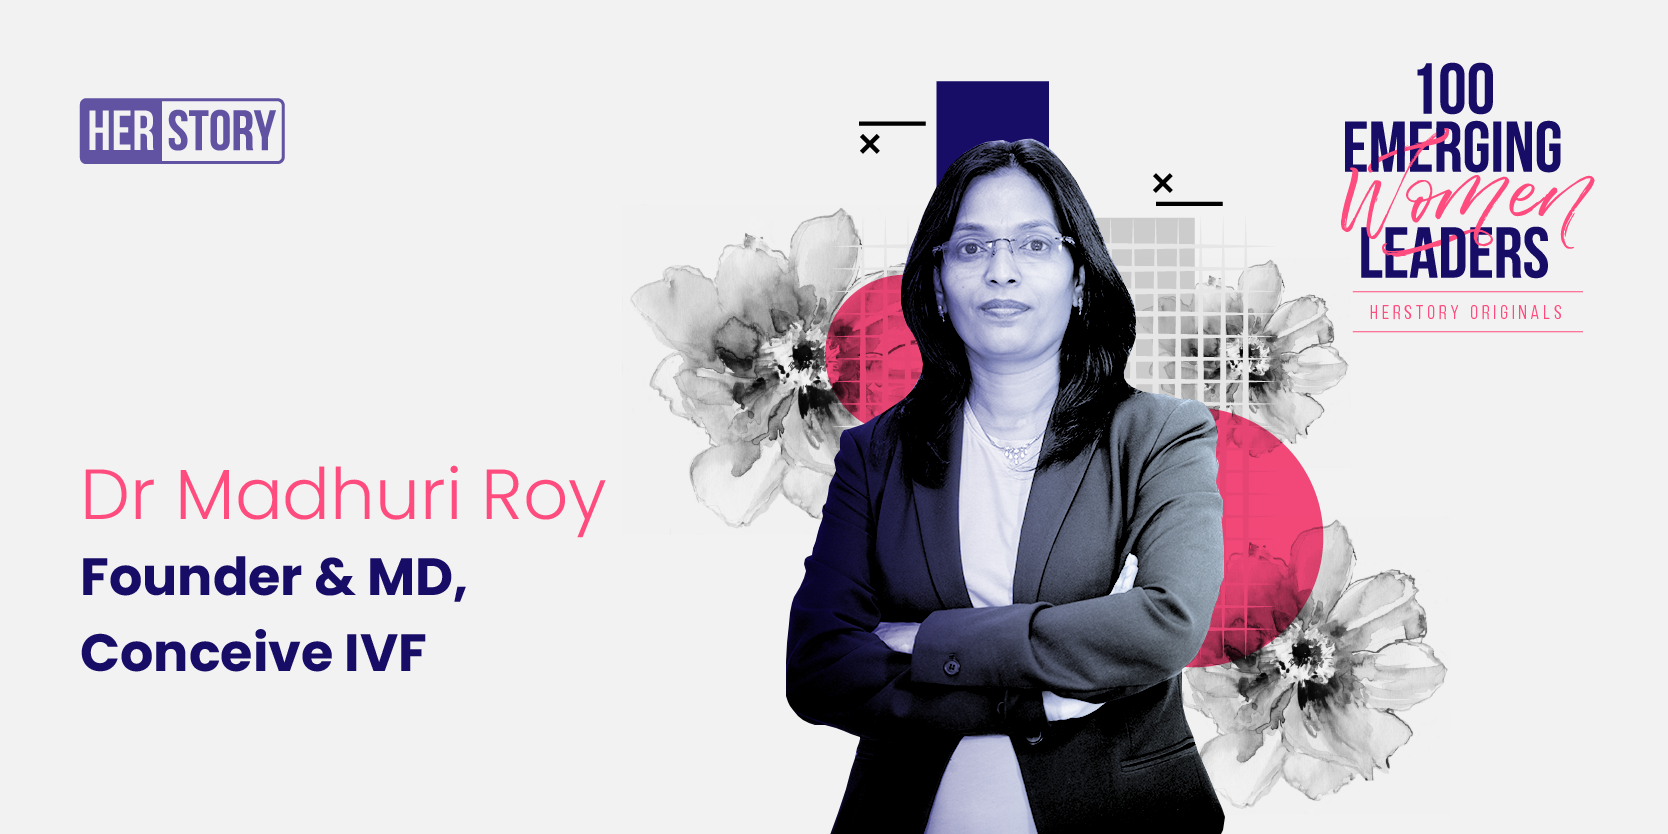 [100 Emerging Women Leaders] Meet Dr Madhuri Roy, who became a doctor by studying in the light of oil lamps 
